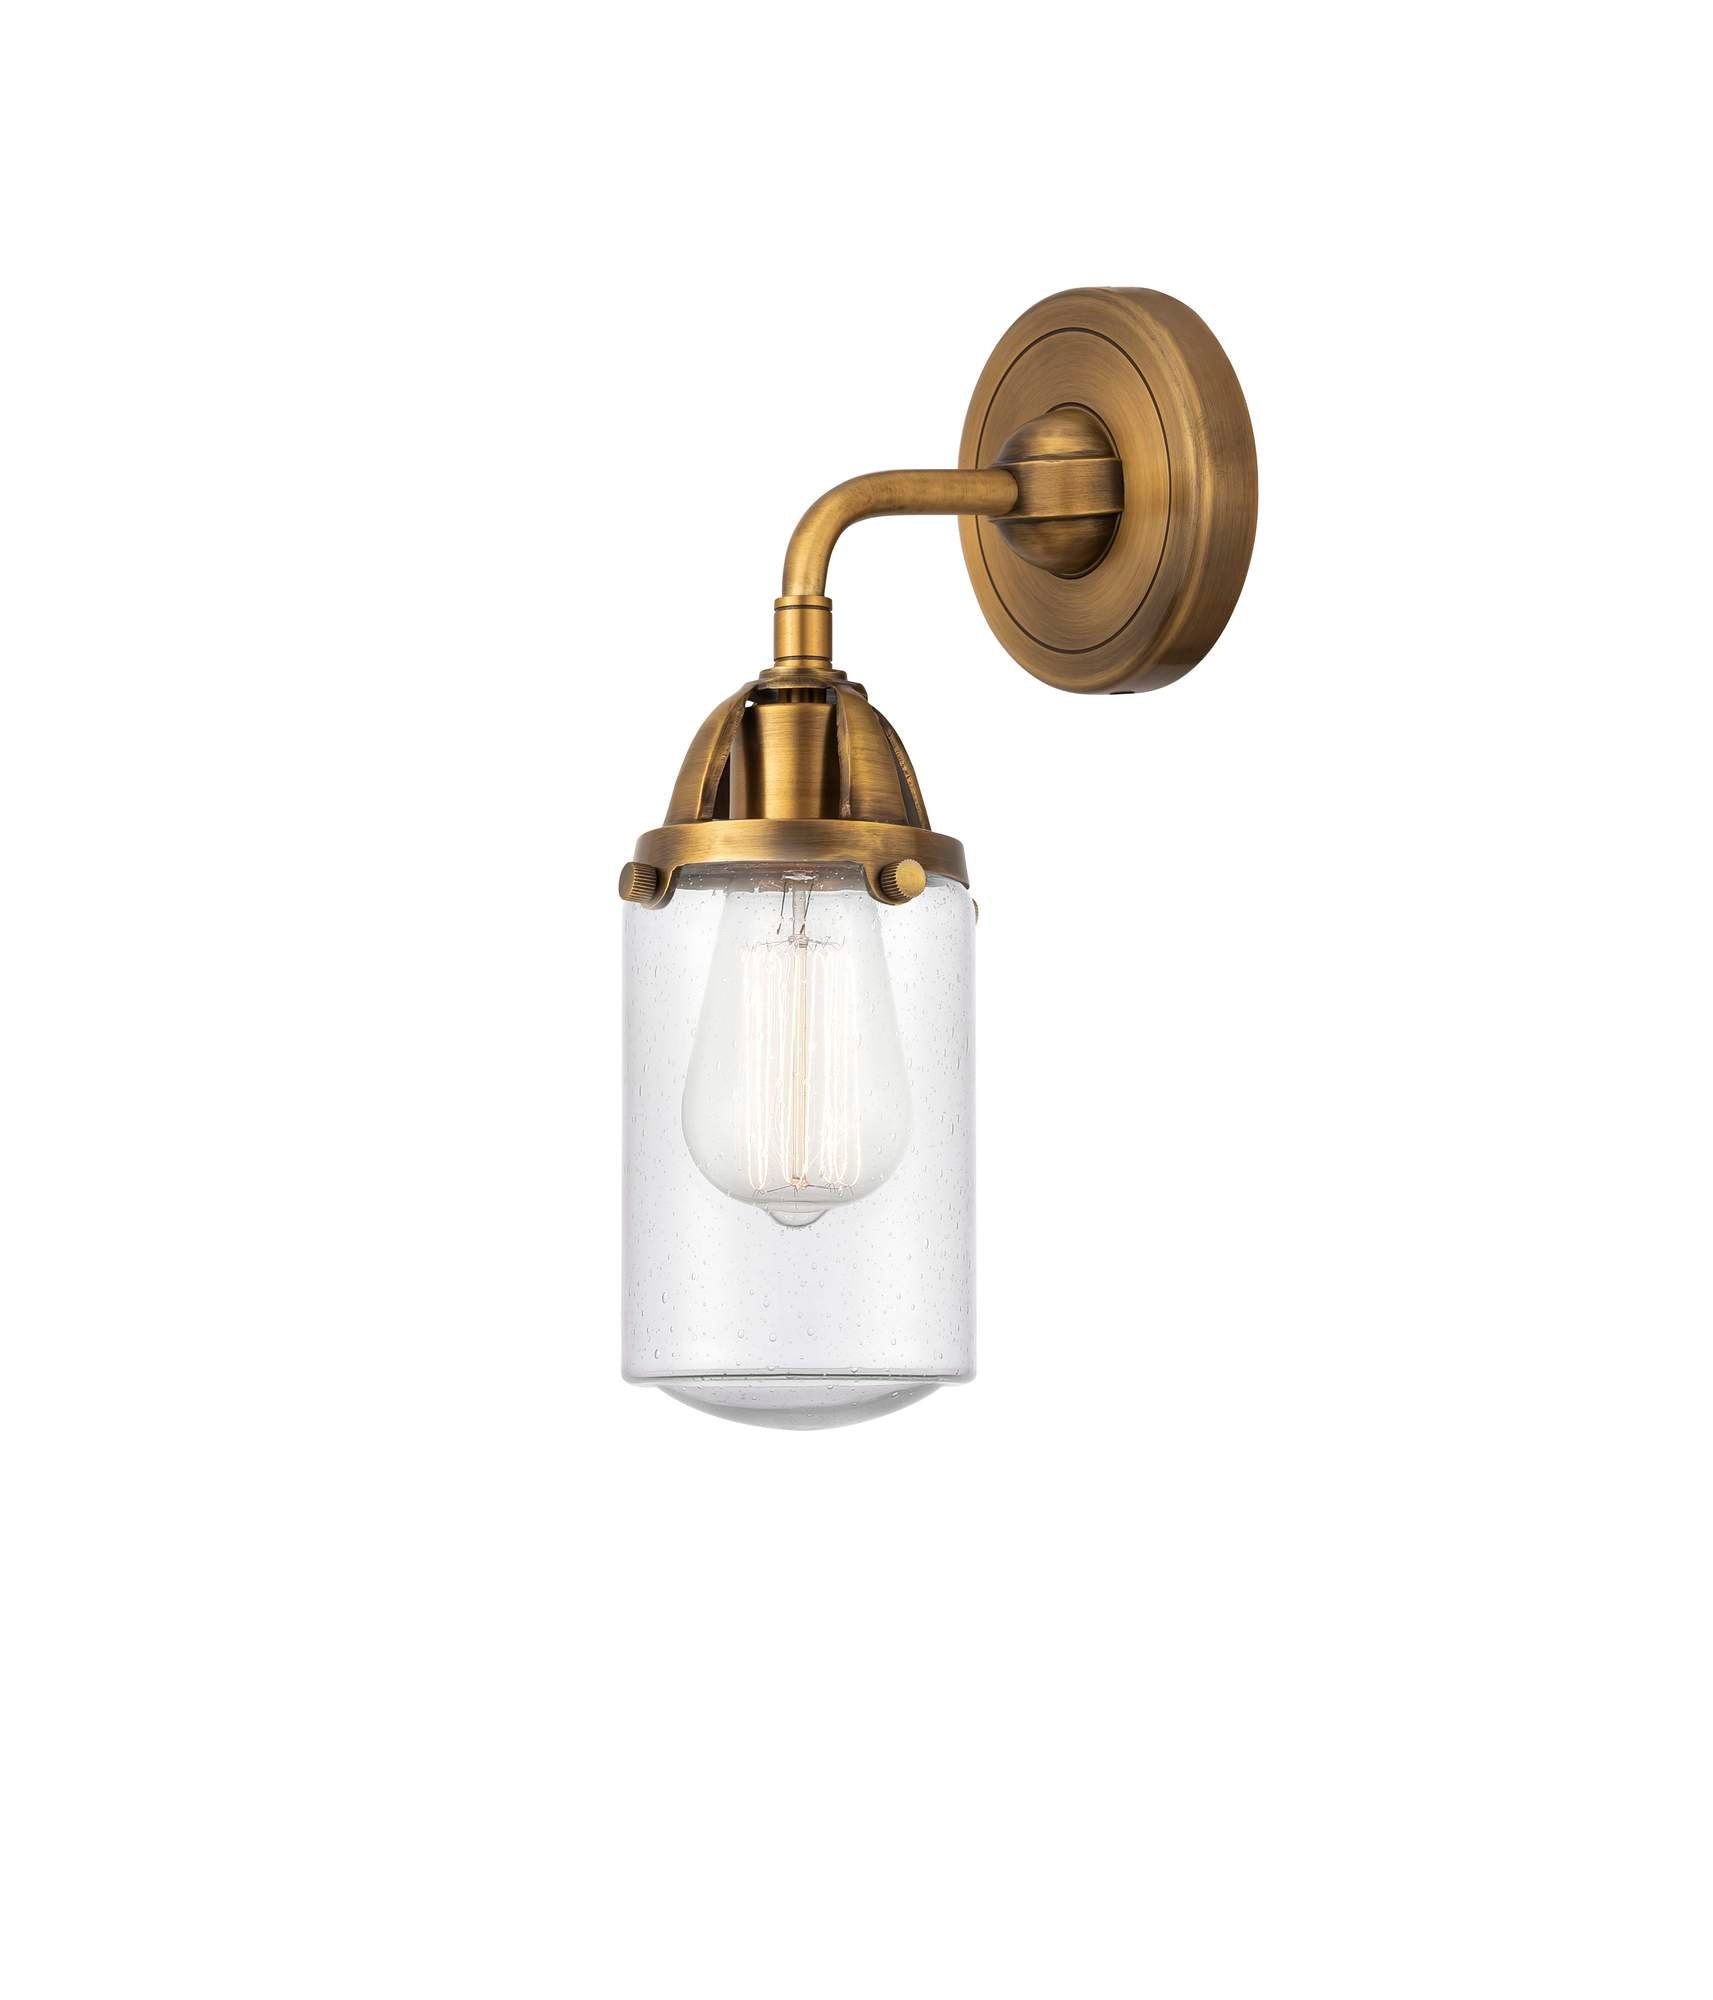 288-1W-BB-G314 1-Light 4.5" Brushed Brass Sconce - Seedy Dover Glass - LED Bulb - Dimmensions: 4.5 x 6.5 x 10.875 - Glass Up or Down: Yes